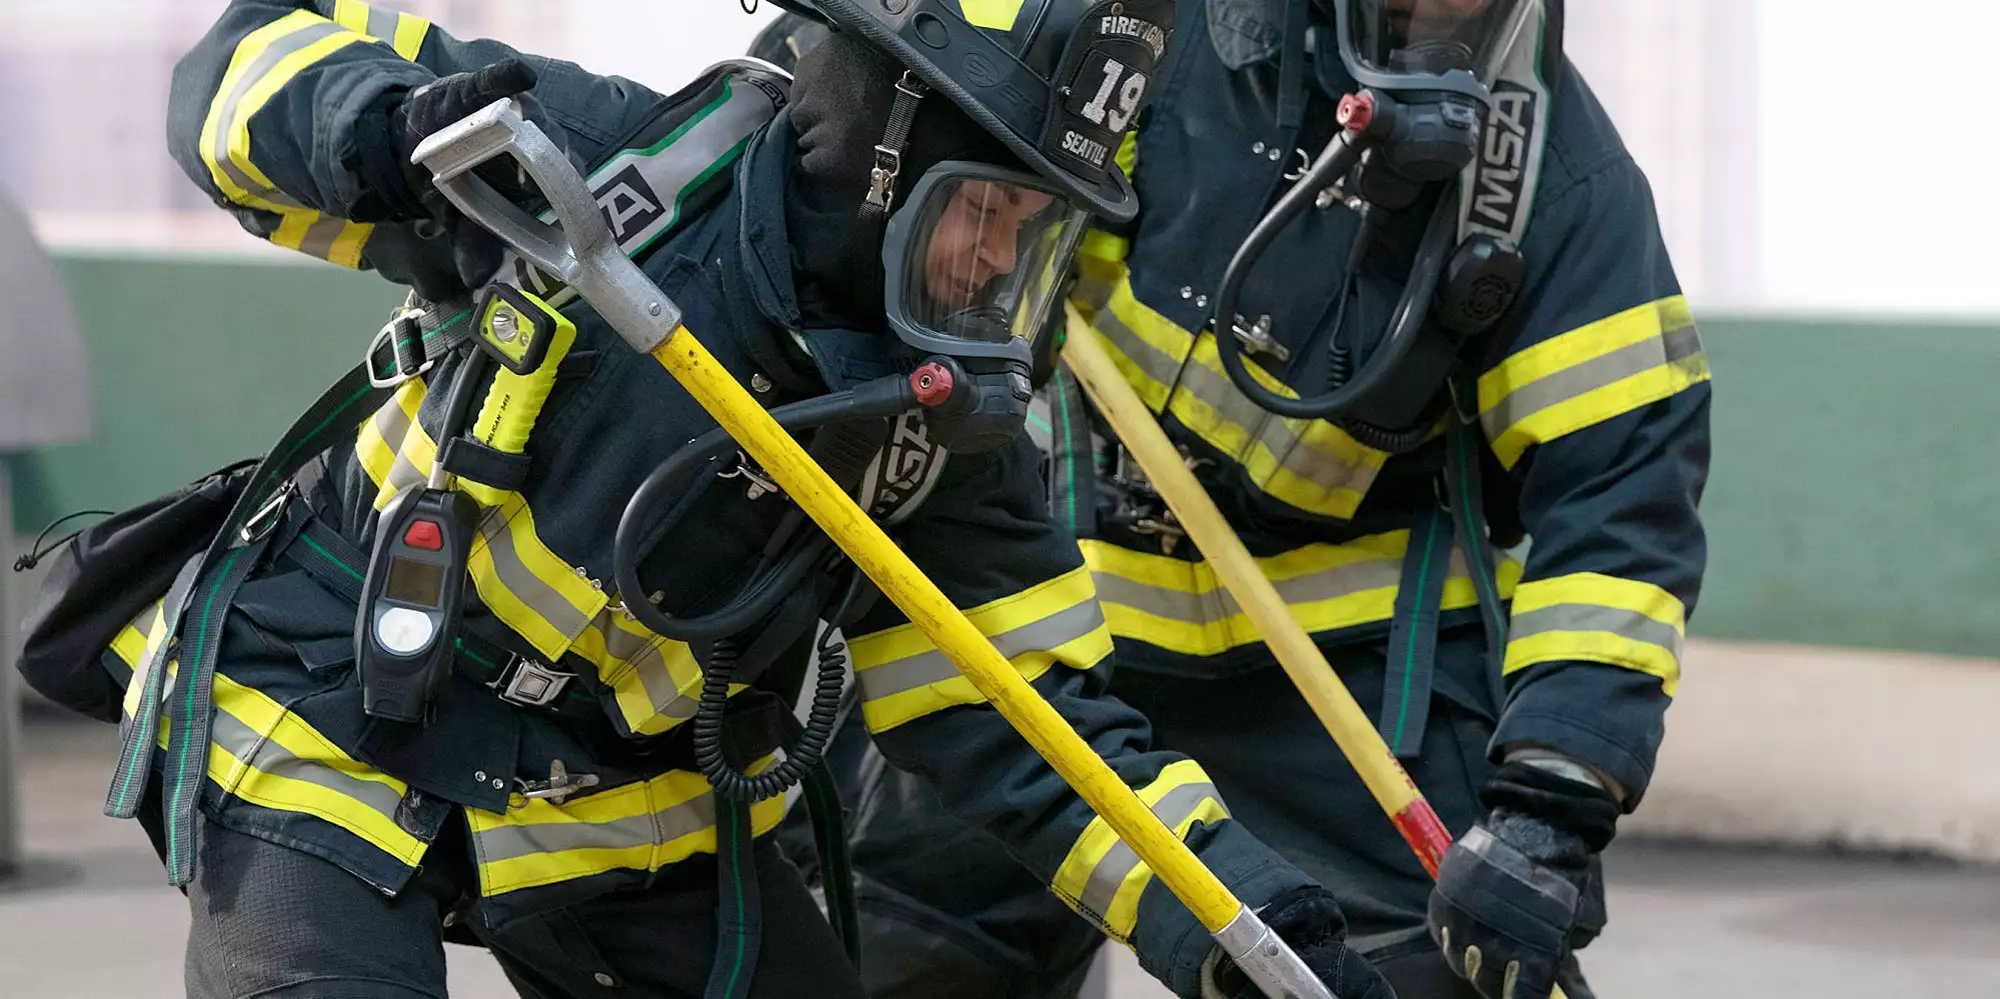 Station 19 Season 6 Episode 4 Release Date & Streaming Guide